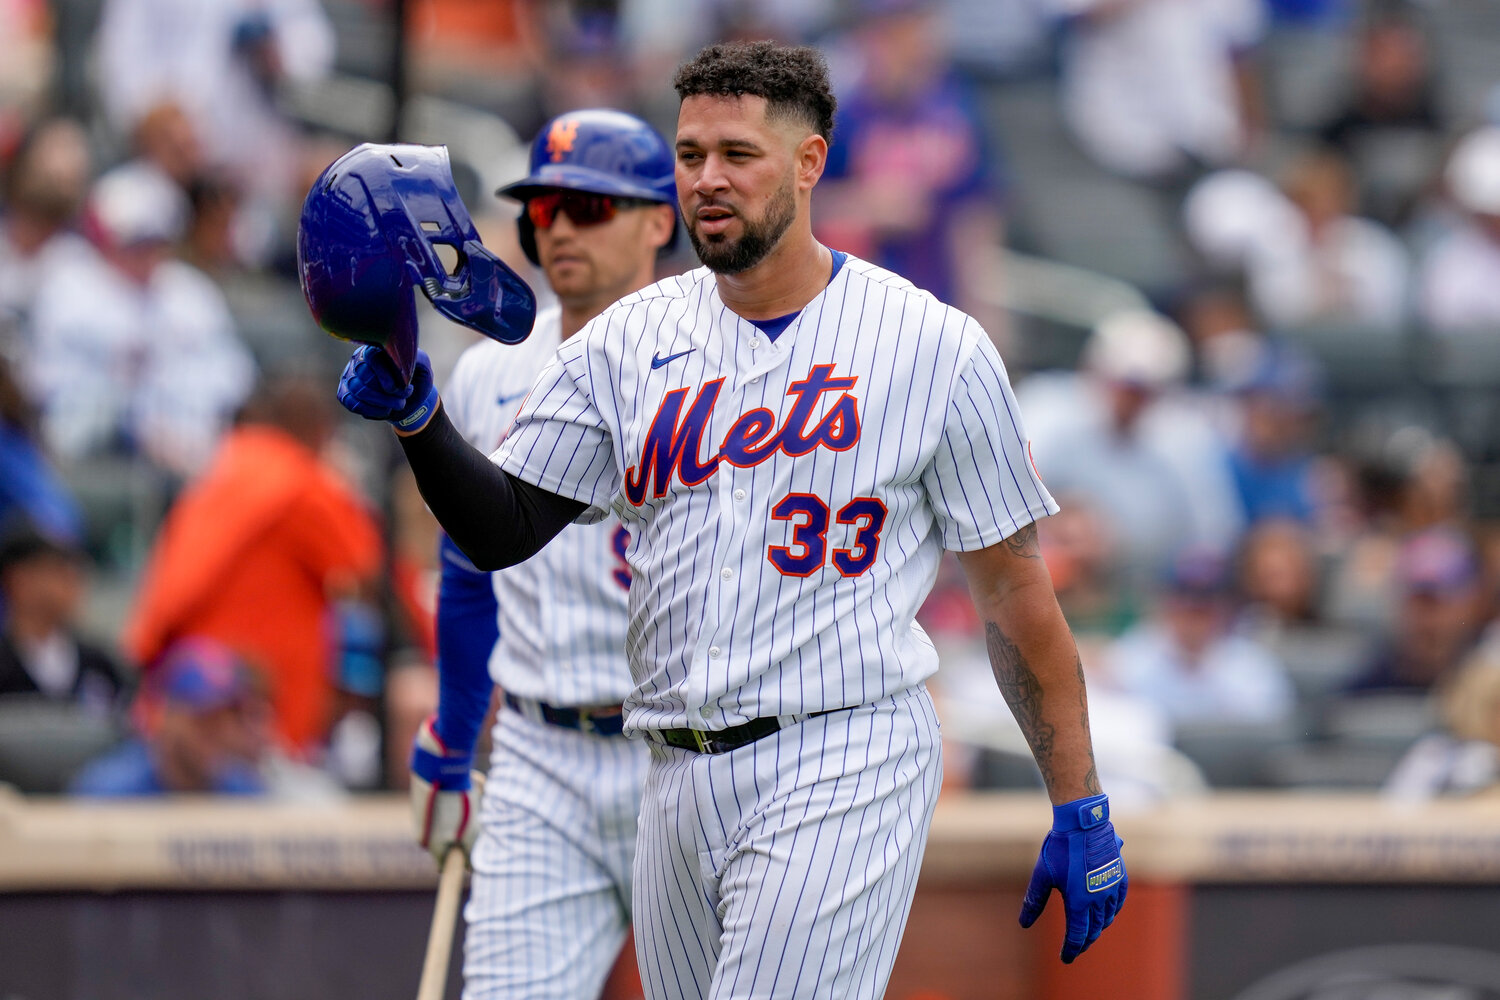 New York Mets' Gary Sánchez reacts after being tagged out at home by Cleveland Guardians catcher Mike Zunino in the fourth inning of the opener of a split doubleheader on Sunday in New York.